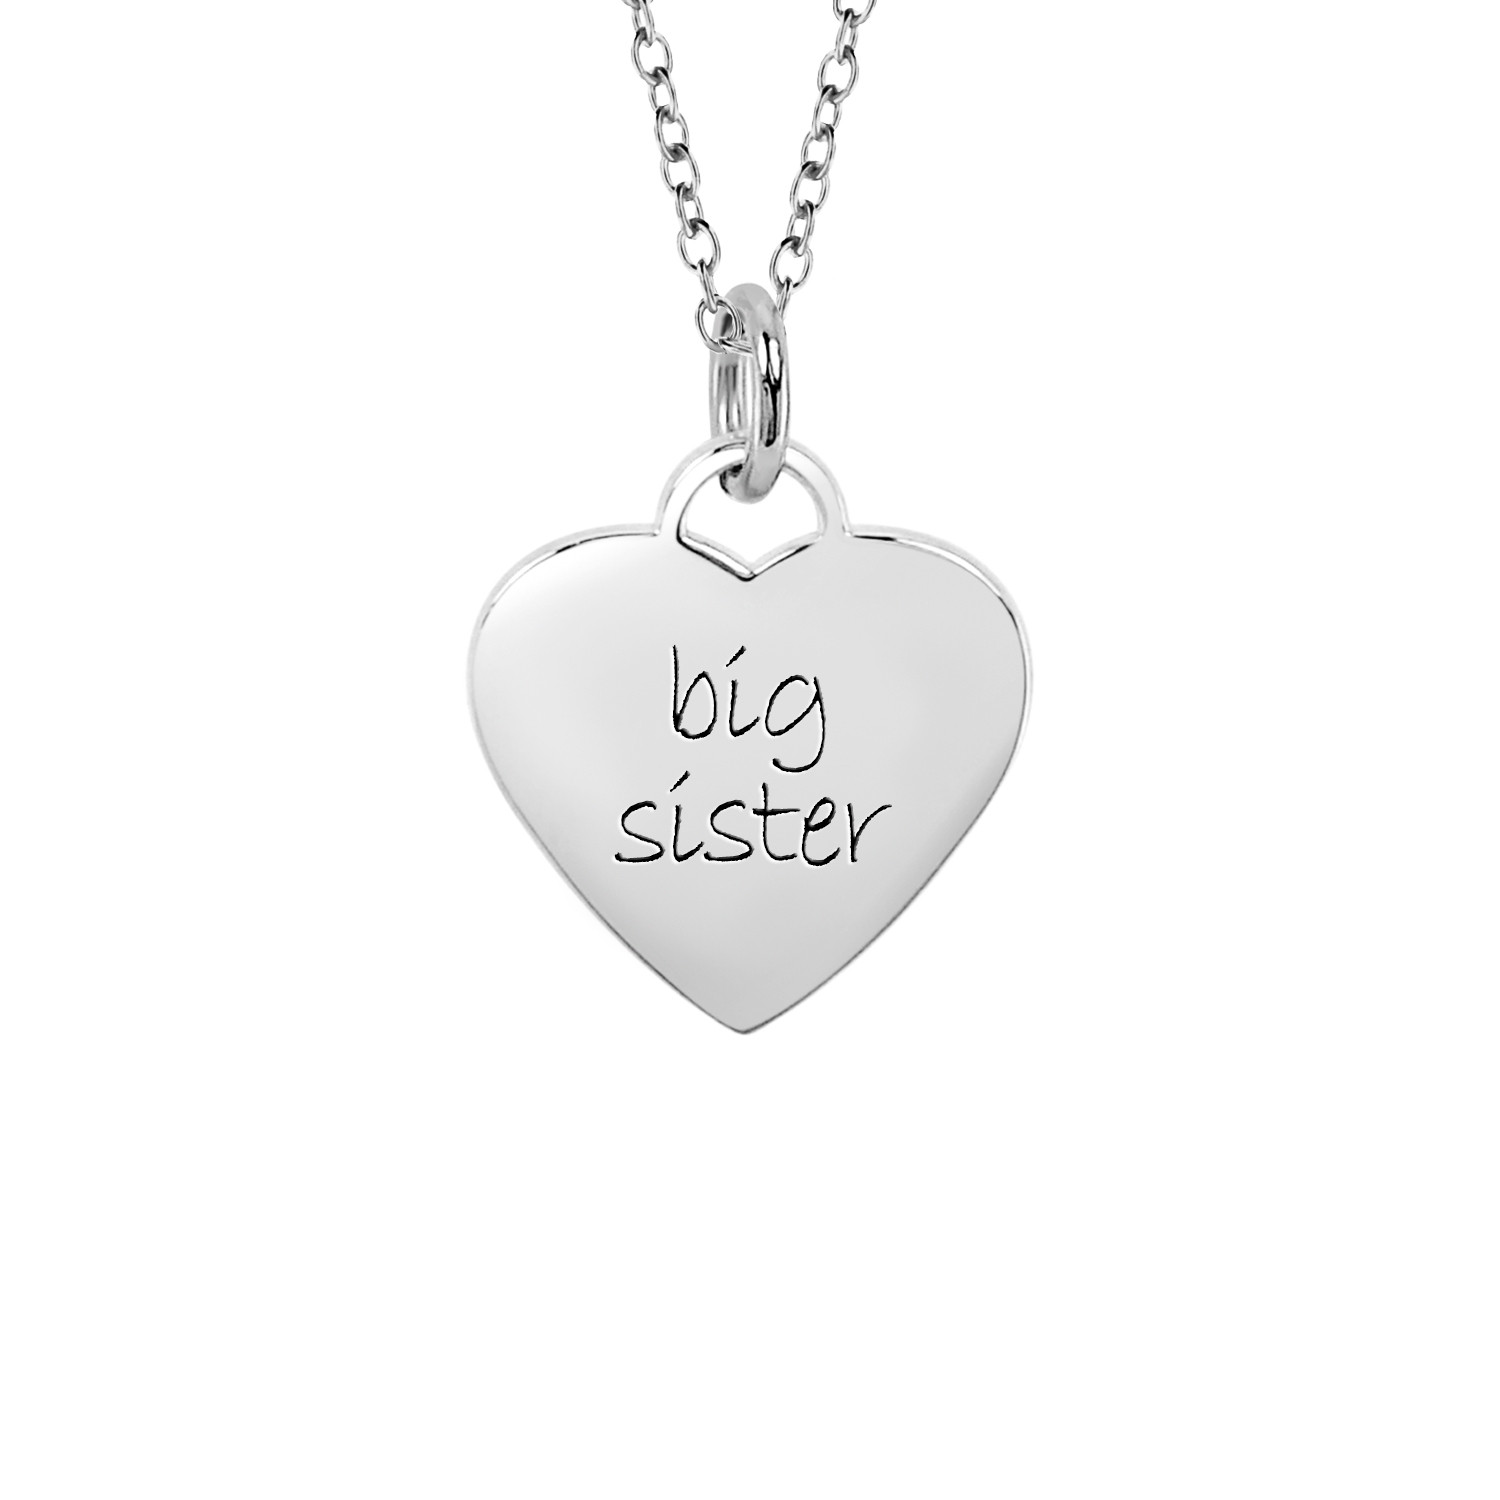 Big Sis Lil Heart Necklace | Matching Necklaces Set | Mom Lil Sis Necklace  - Jewelry - Aliexpress